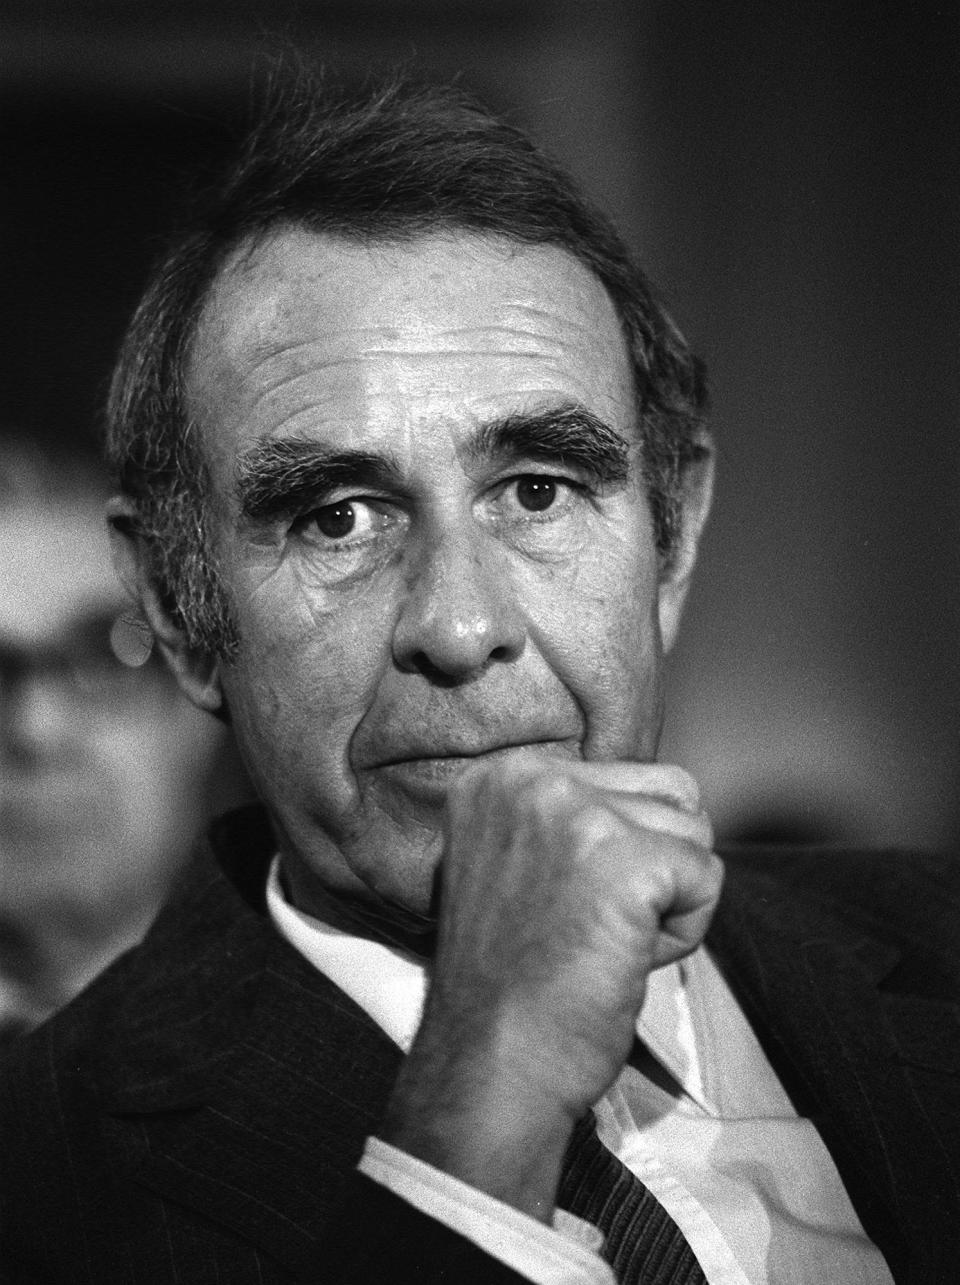 Sen. Harrison Williams, D-N.J., is shown in this July 28, 1981 photo in Washington. Former Sen. Williams, a popular champion of organized labor whose career was ended by the Abscam bribery scandal, died on Nov. 17, 2001, at St. Clare's Hospital in Denville, N.J. He was 81.